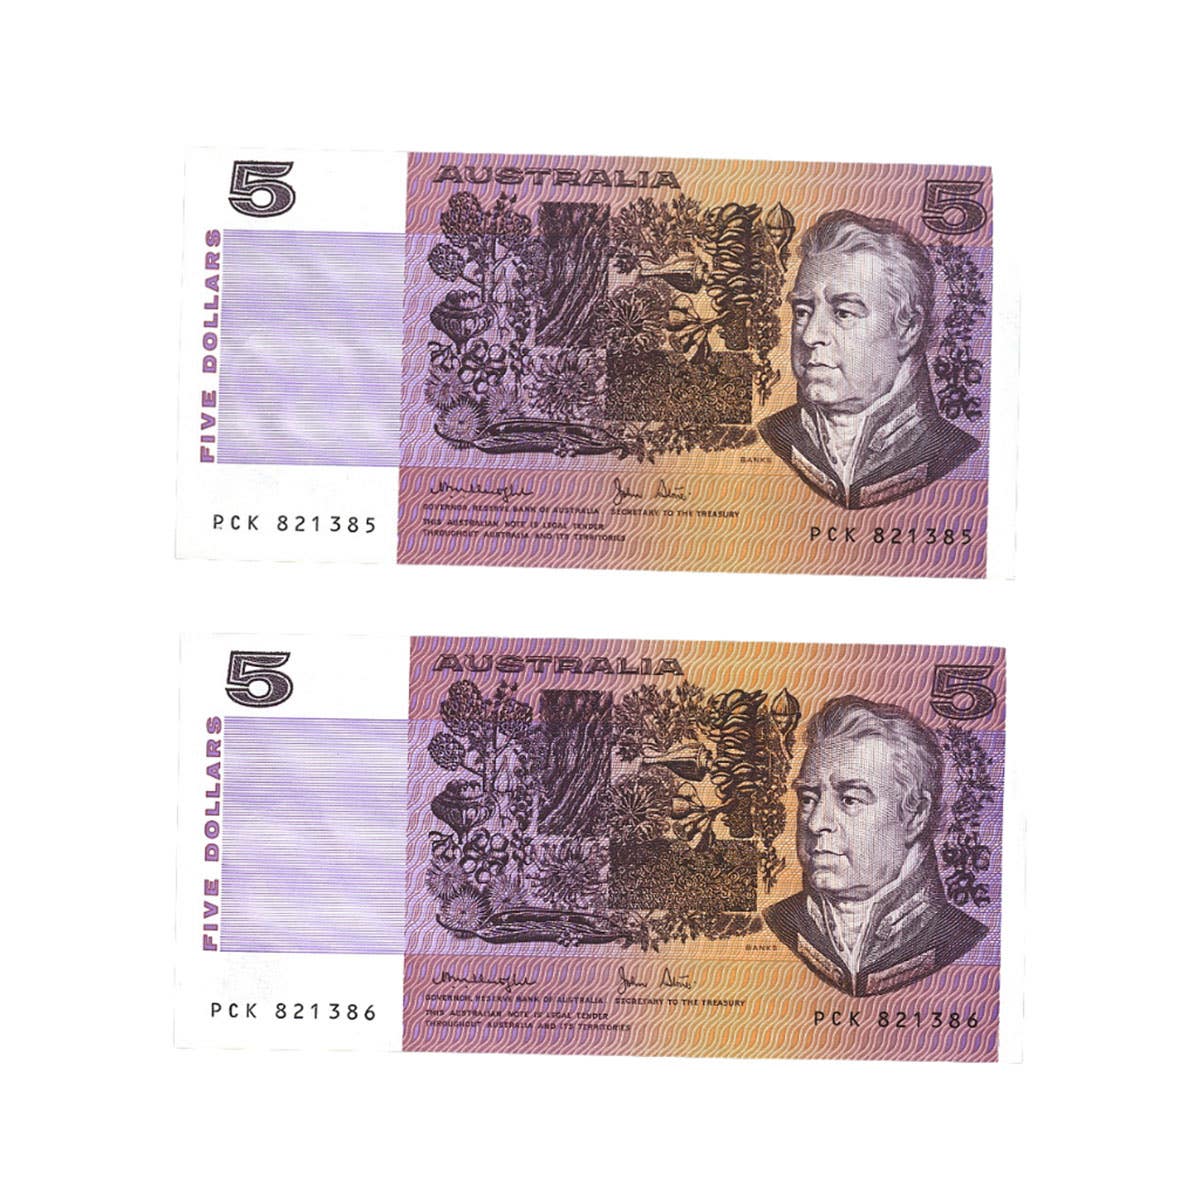 1979 R207 $5 Knight/Stone Banknote Consecutive Pair Uncirculated